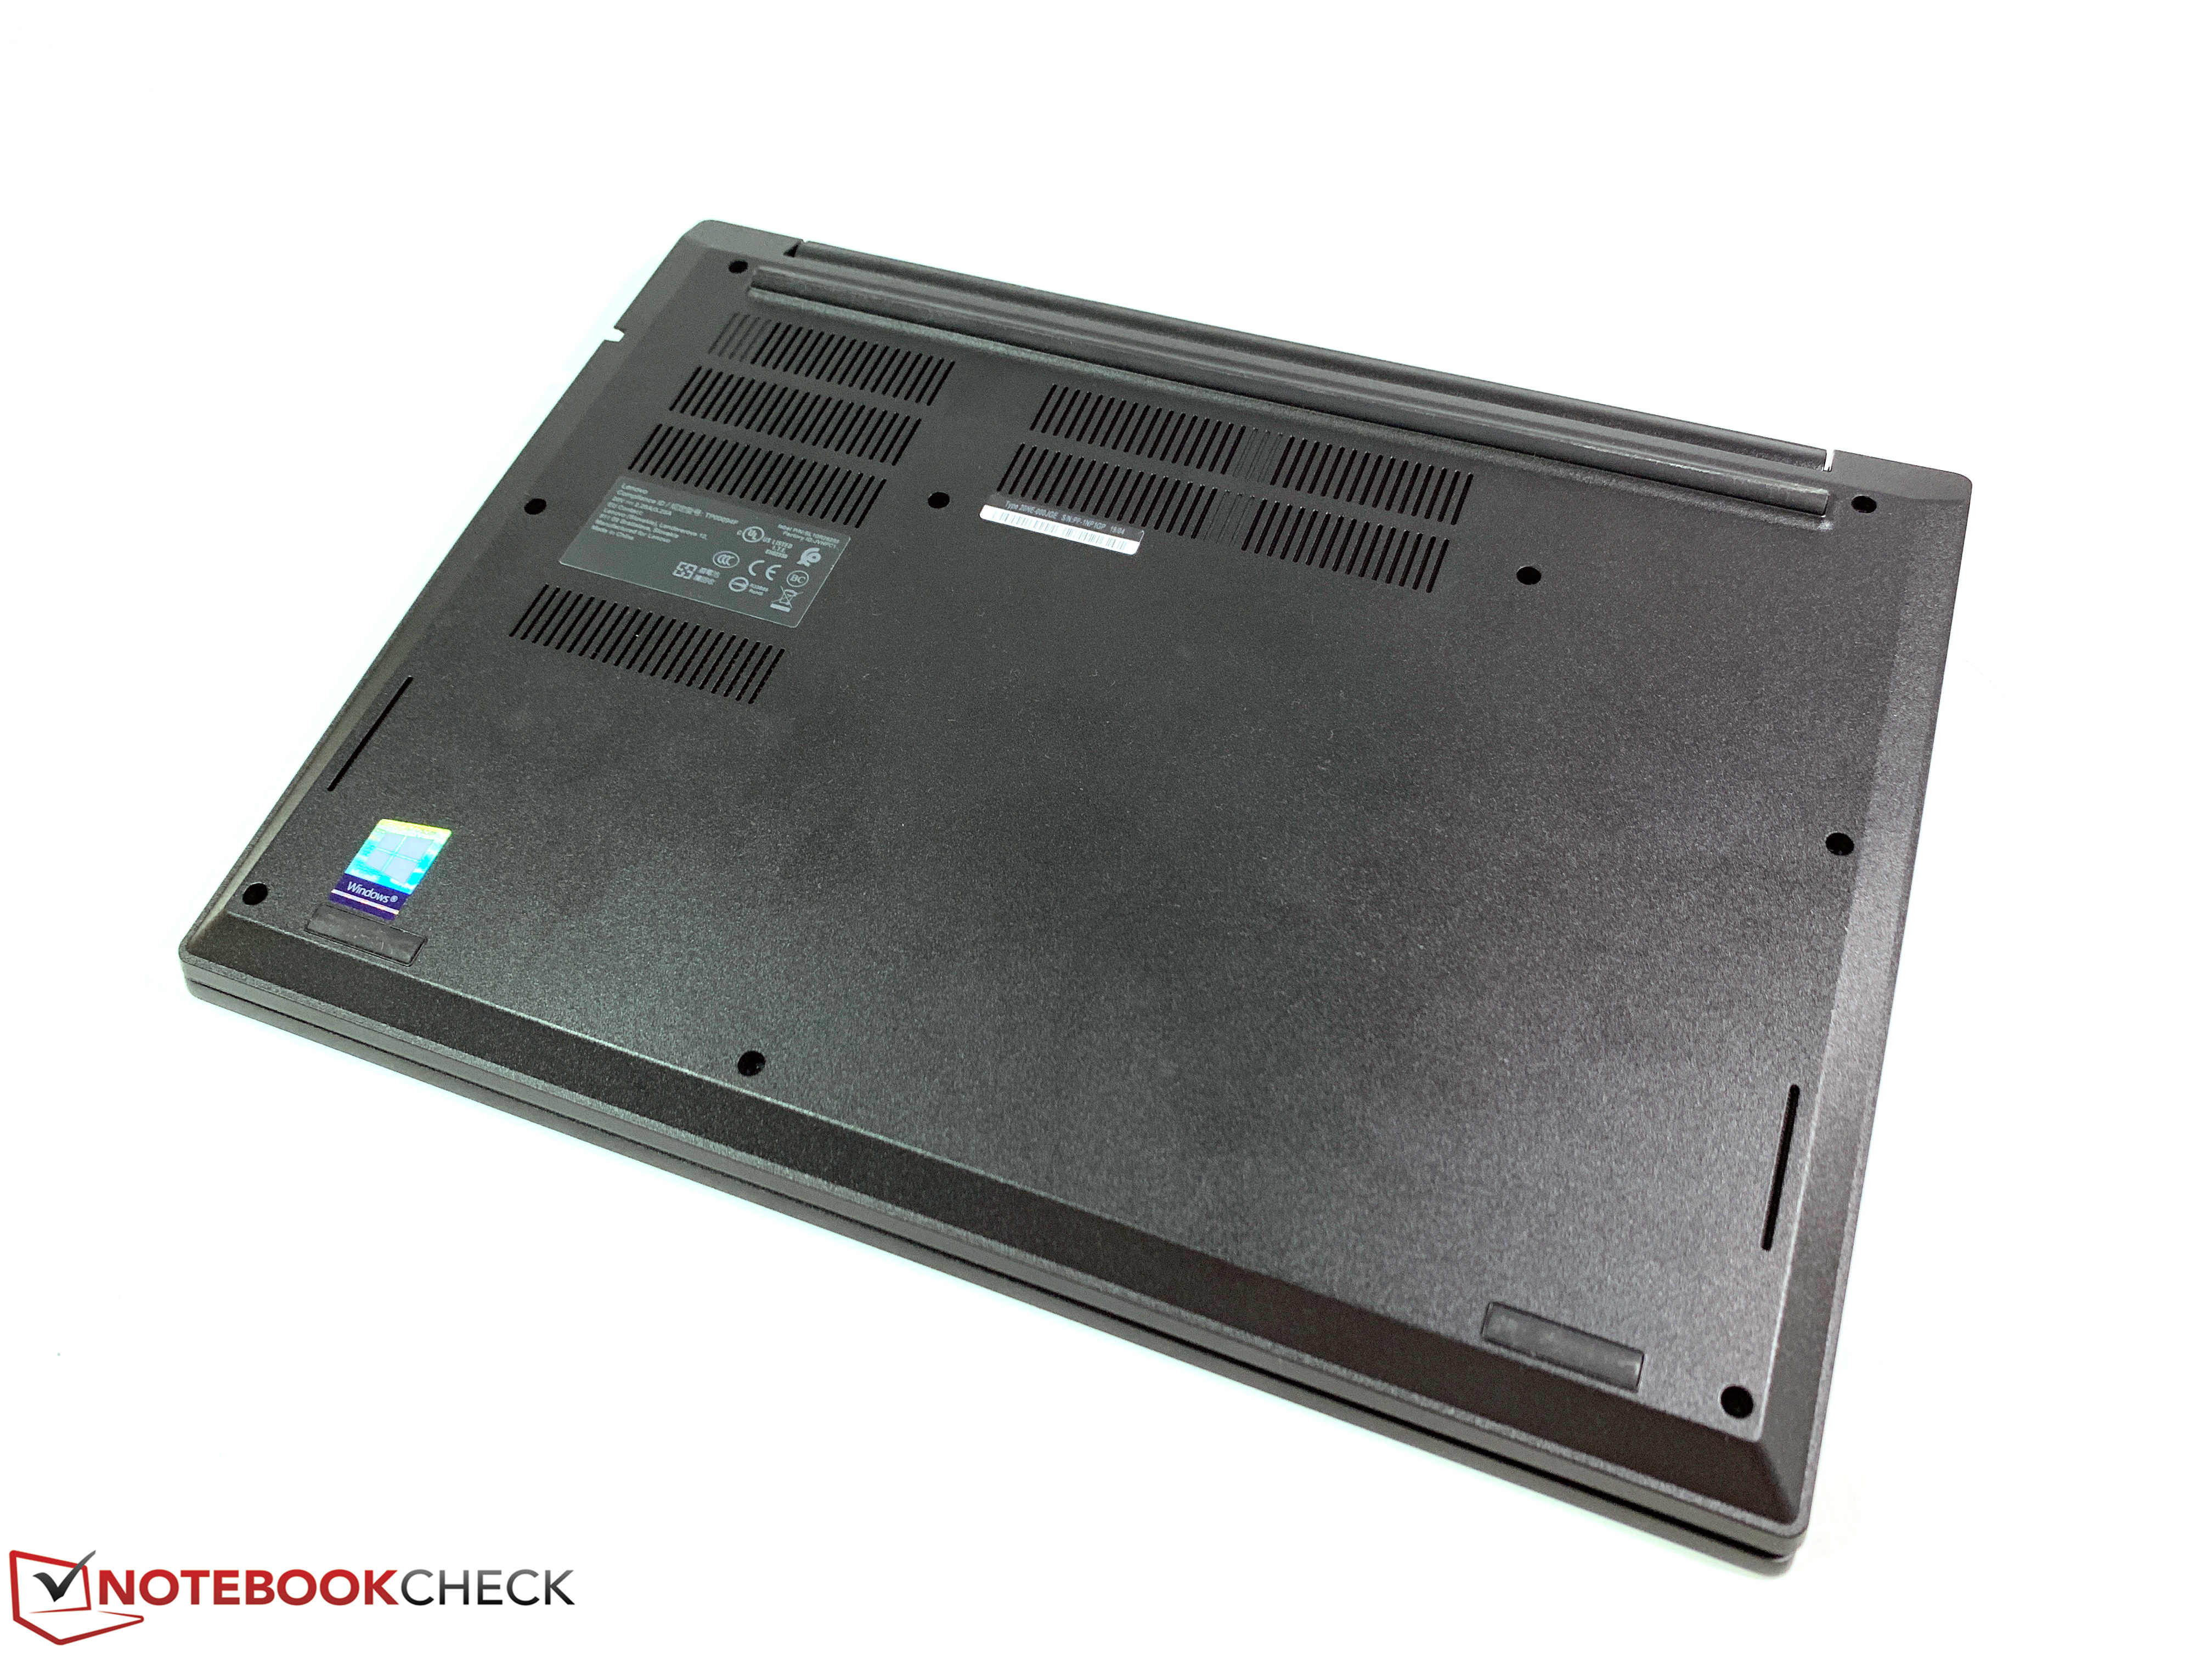 Lenovo ThinkPad E495 Laptop Review: Inexpensive office device with 